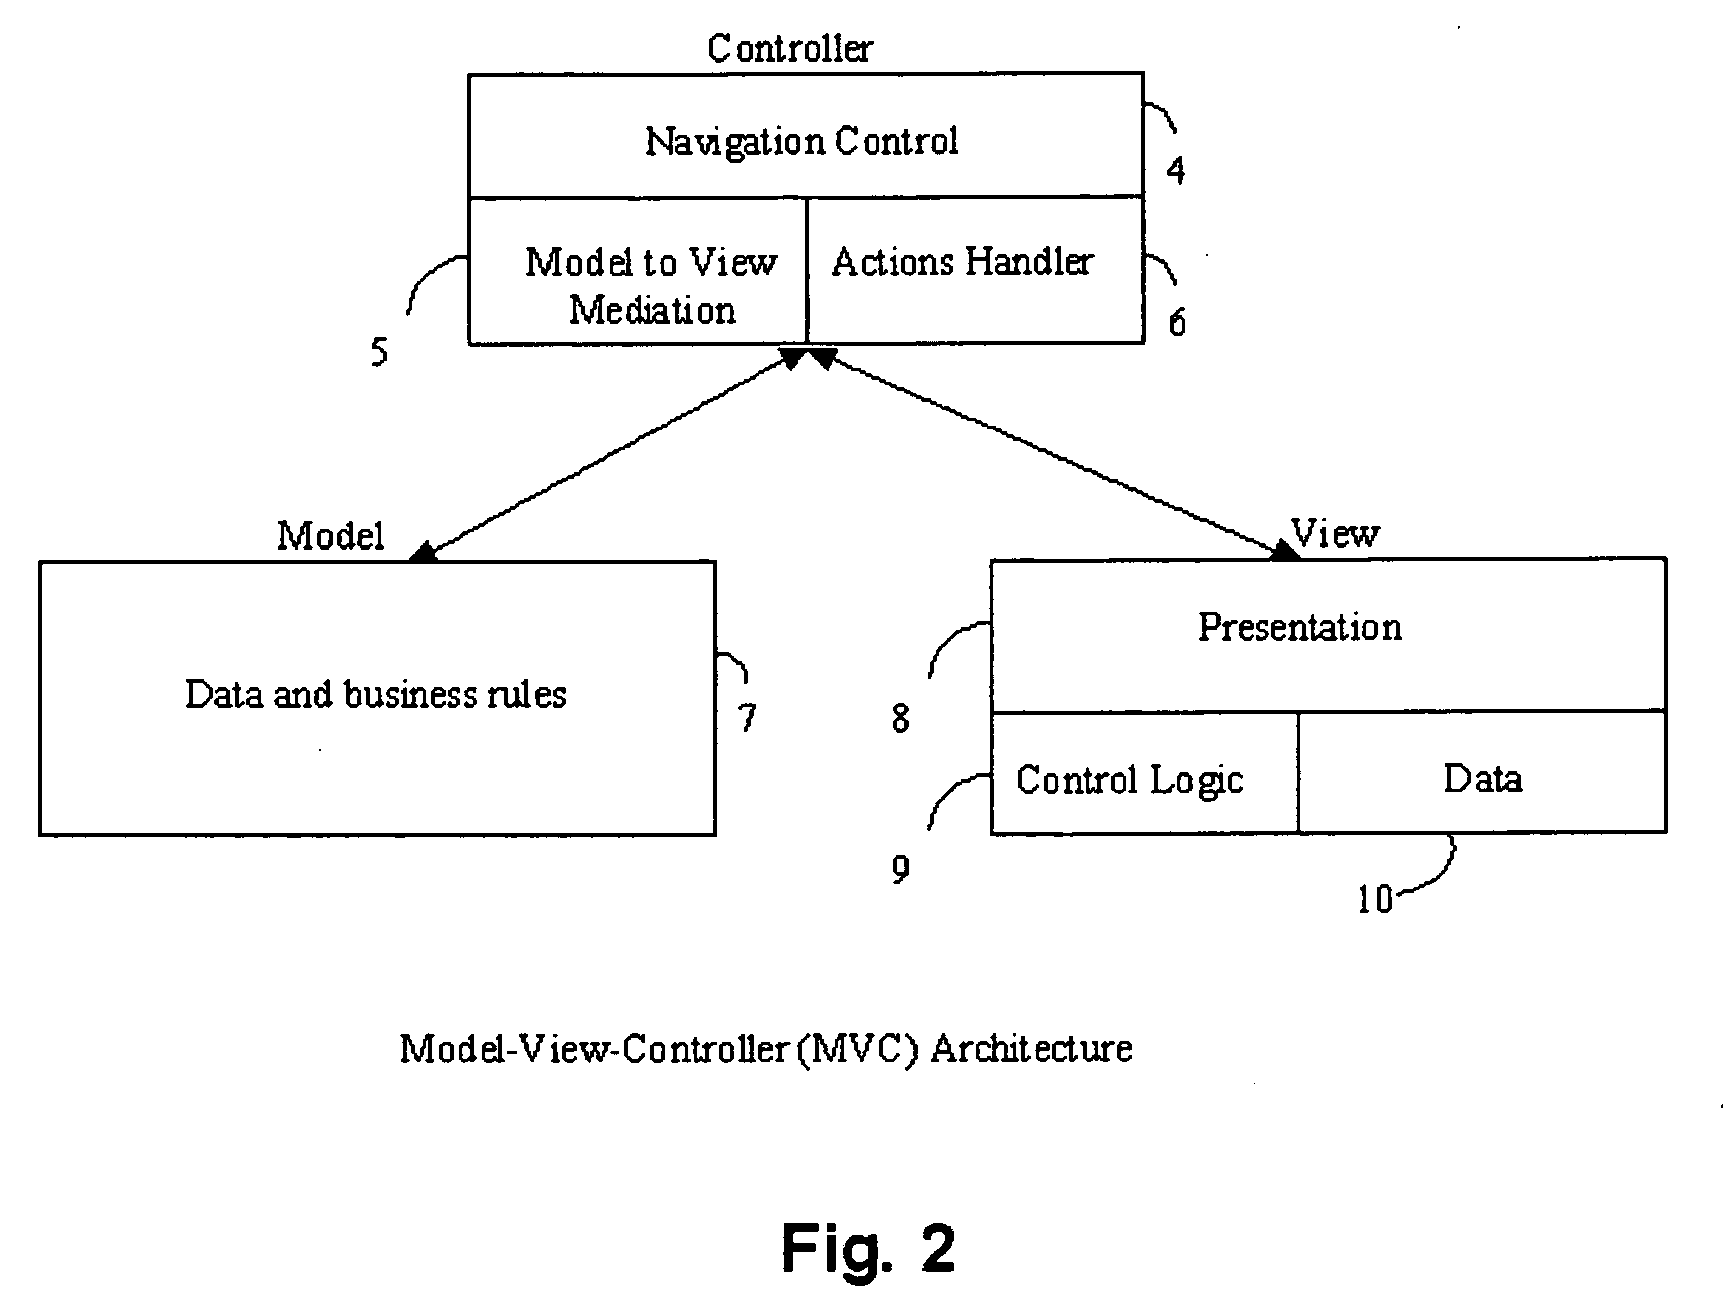 System and Method for Specification and Implementation of MVC (Model-View-Controller) based web applications.